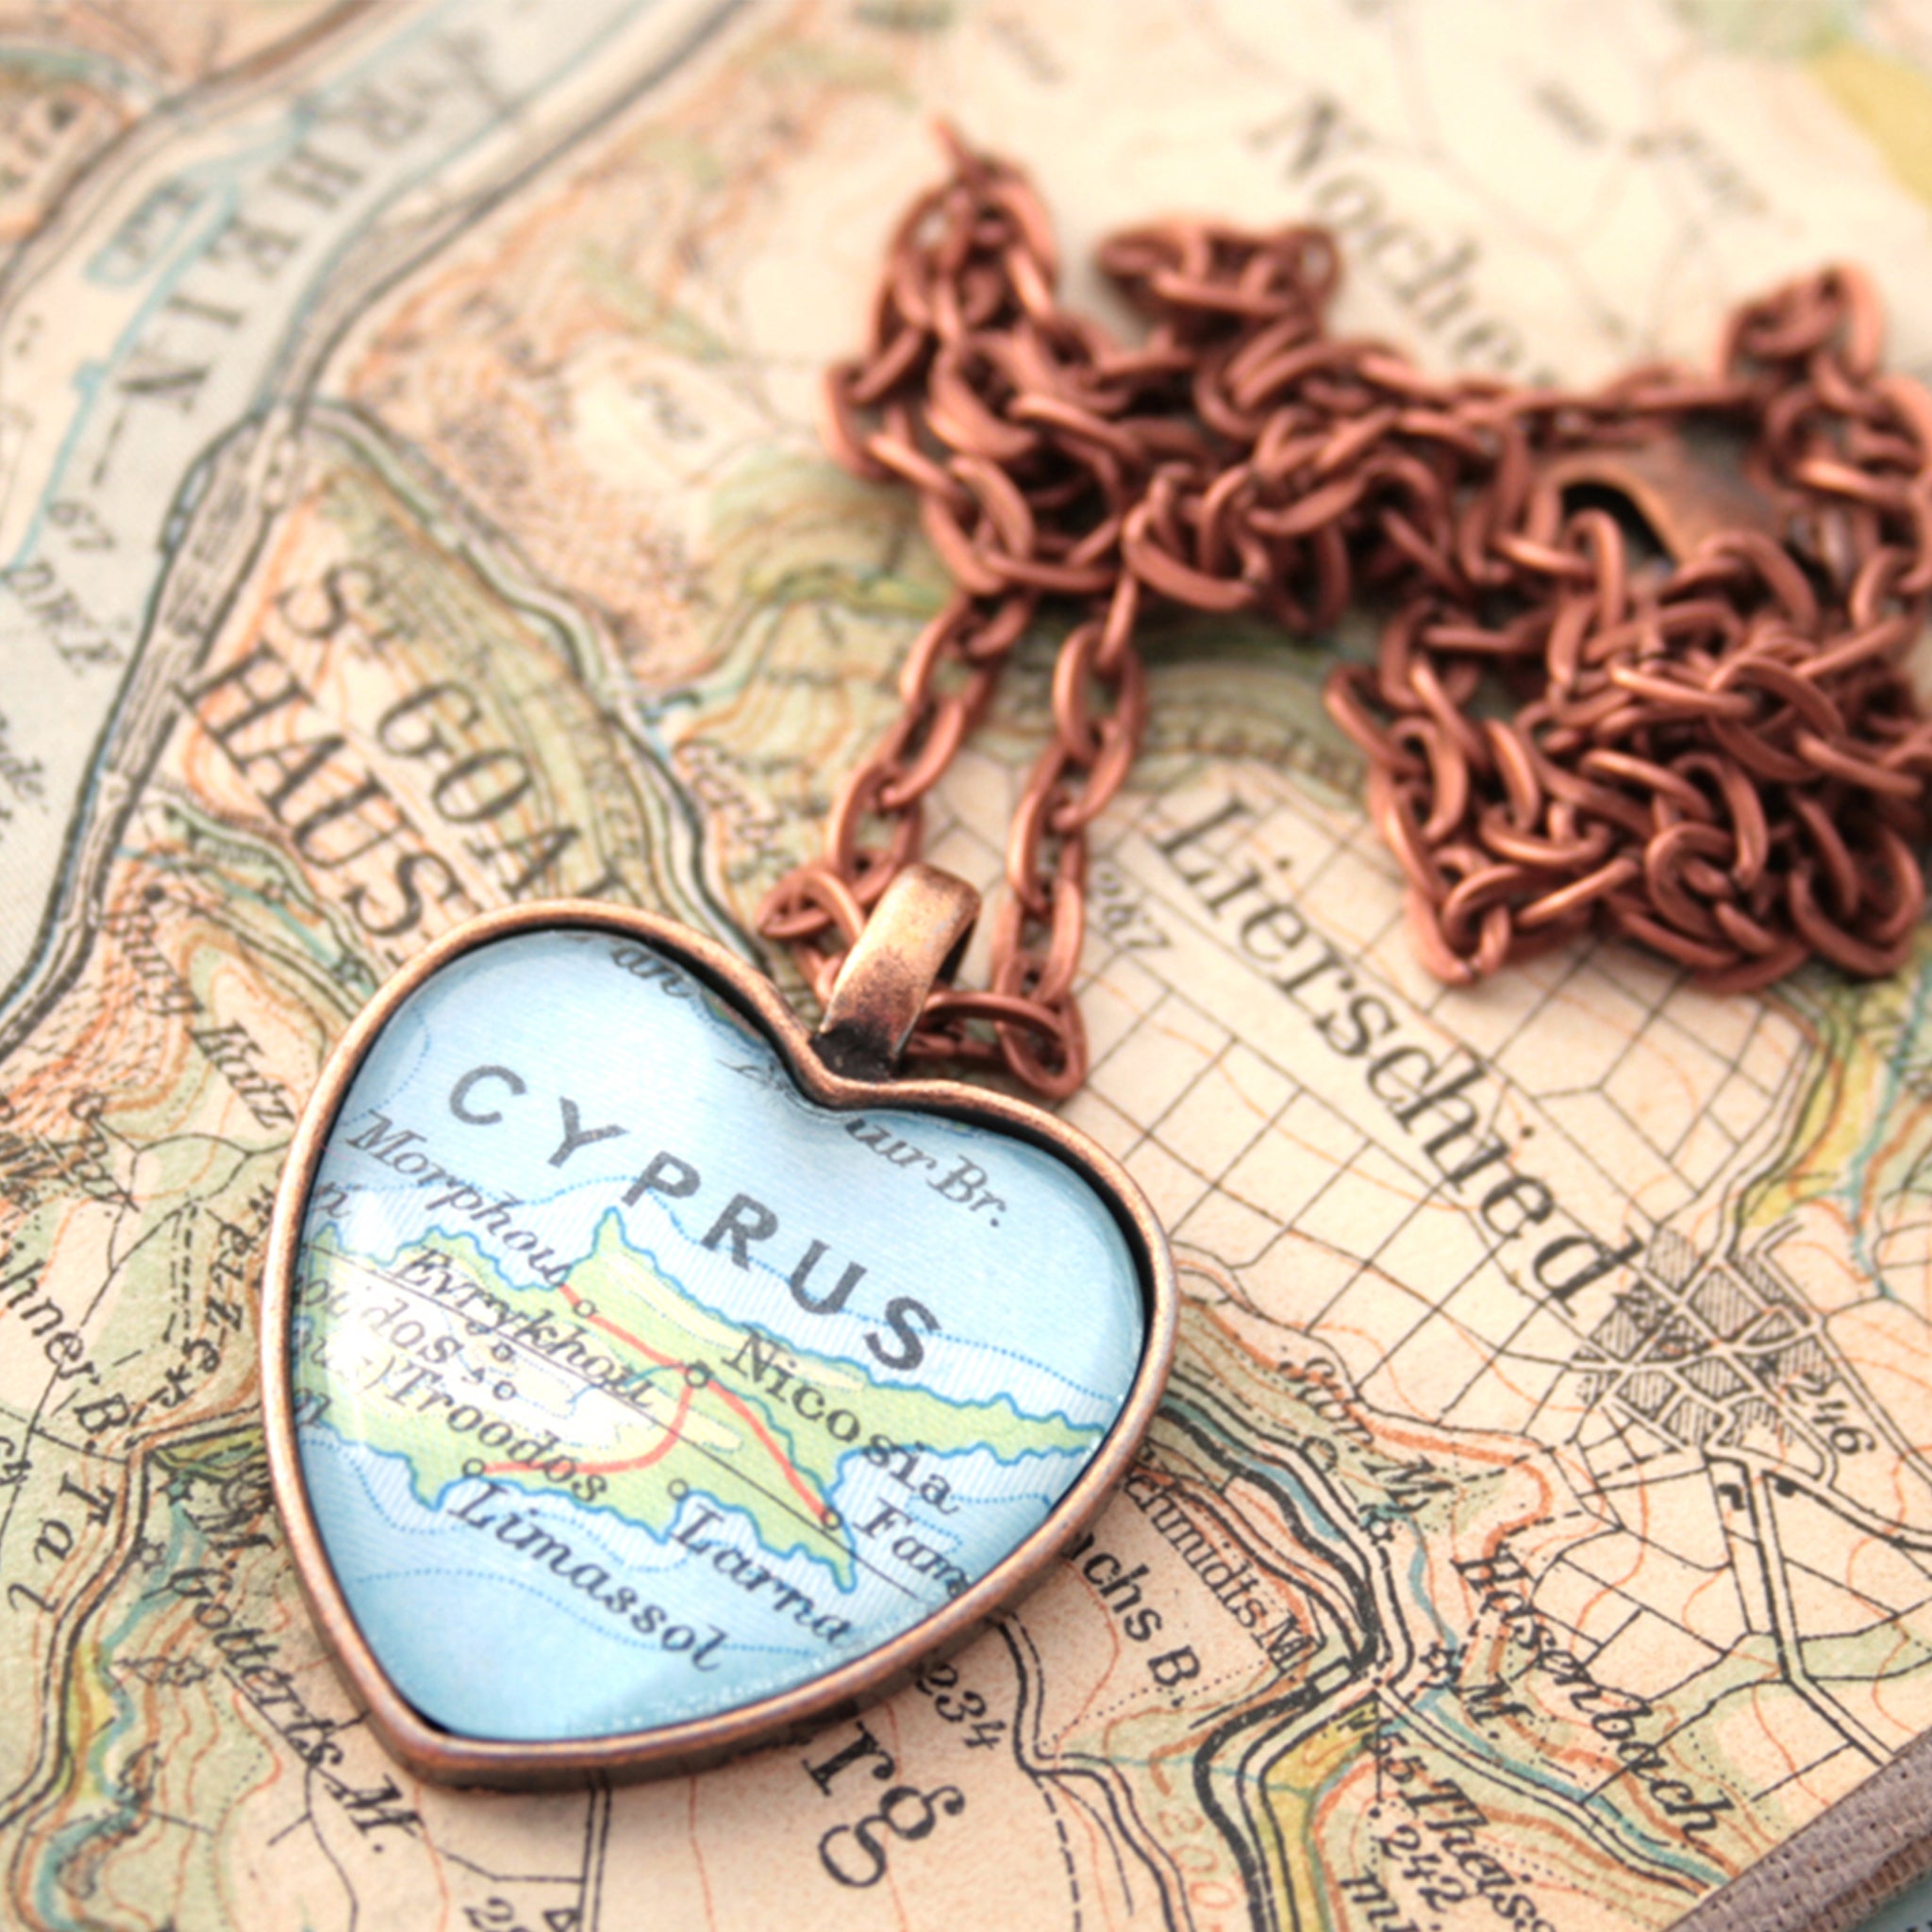 Heart shaped pendant necklace in copper tone featuring map of Cyprus